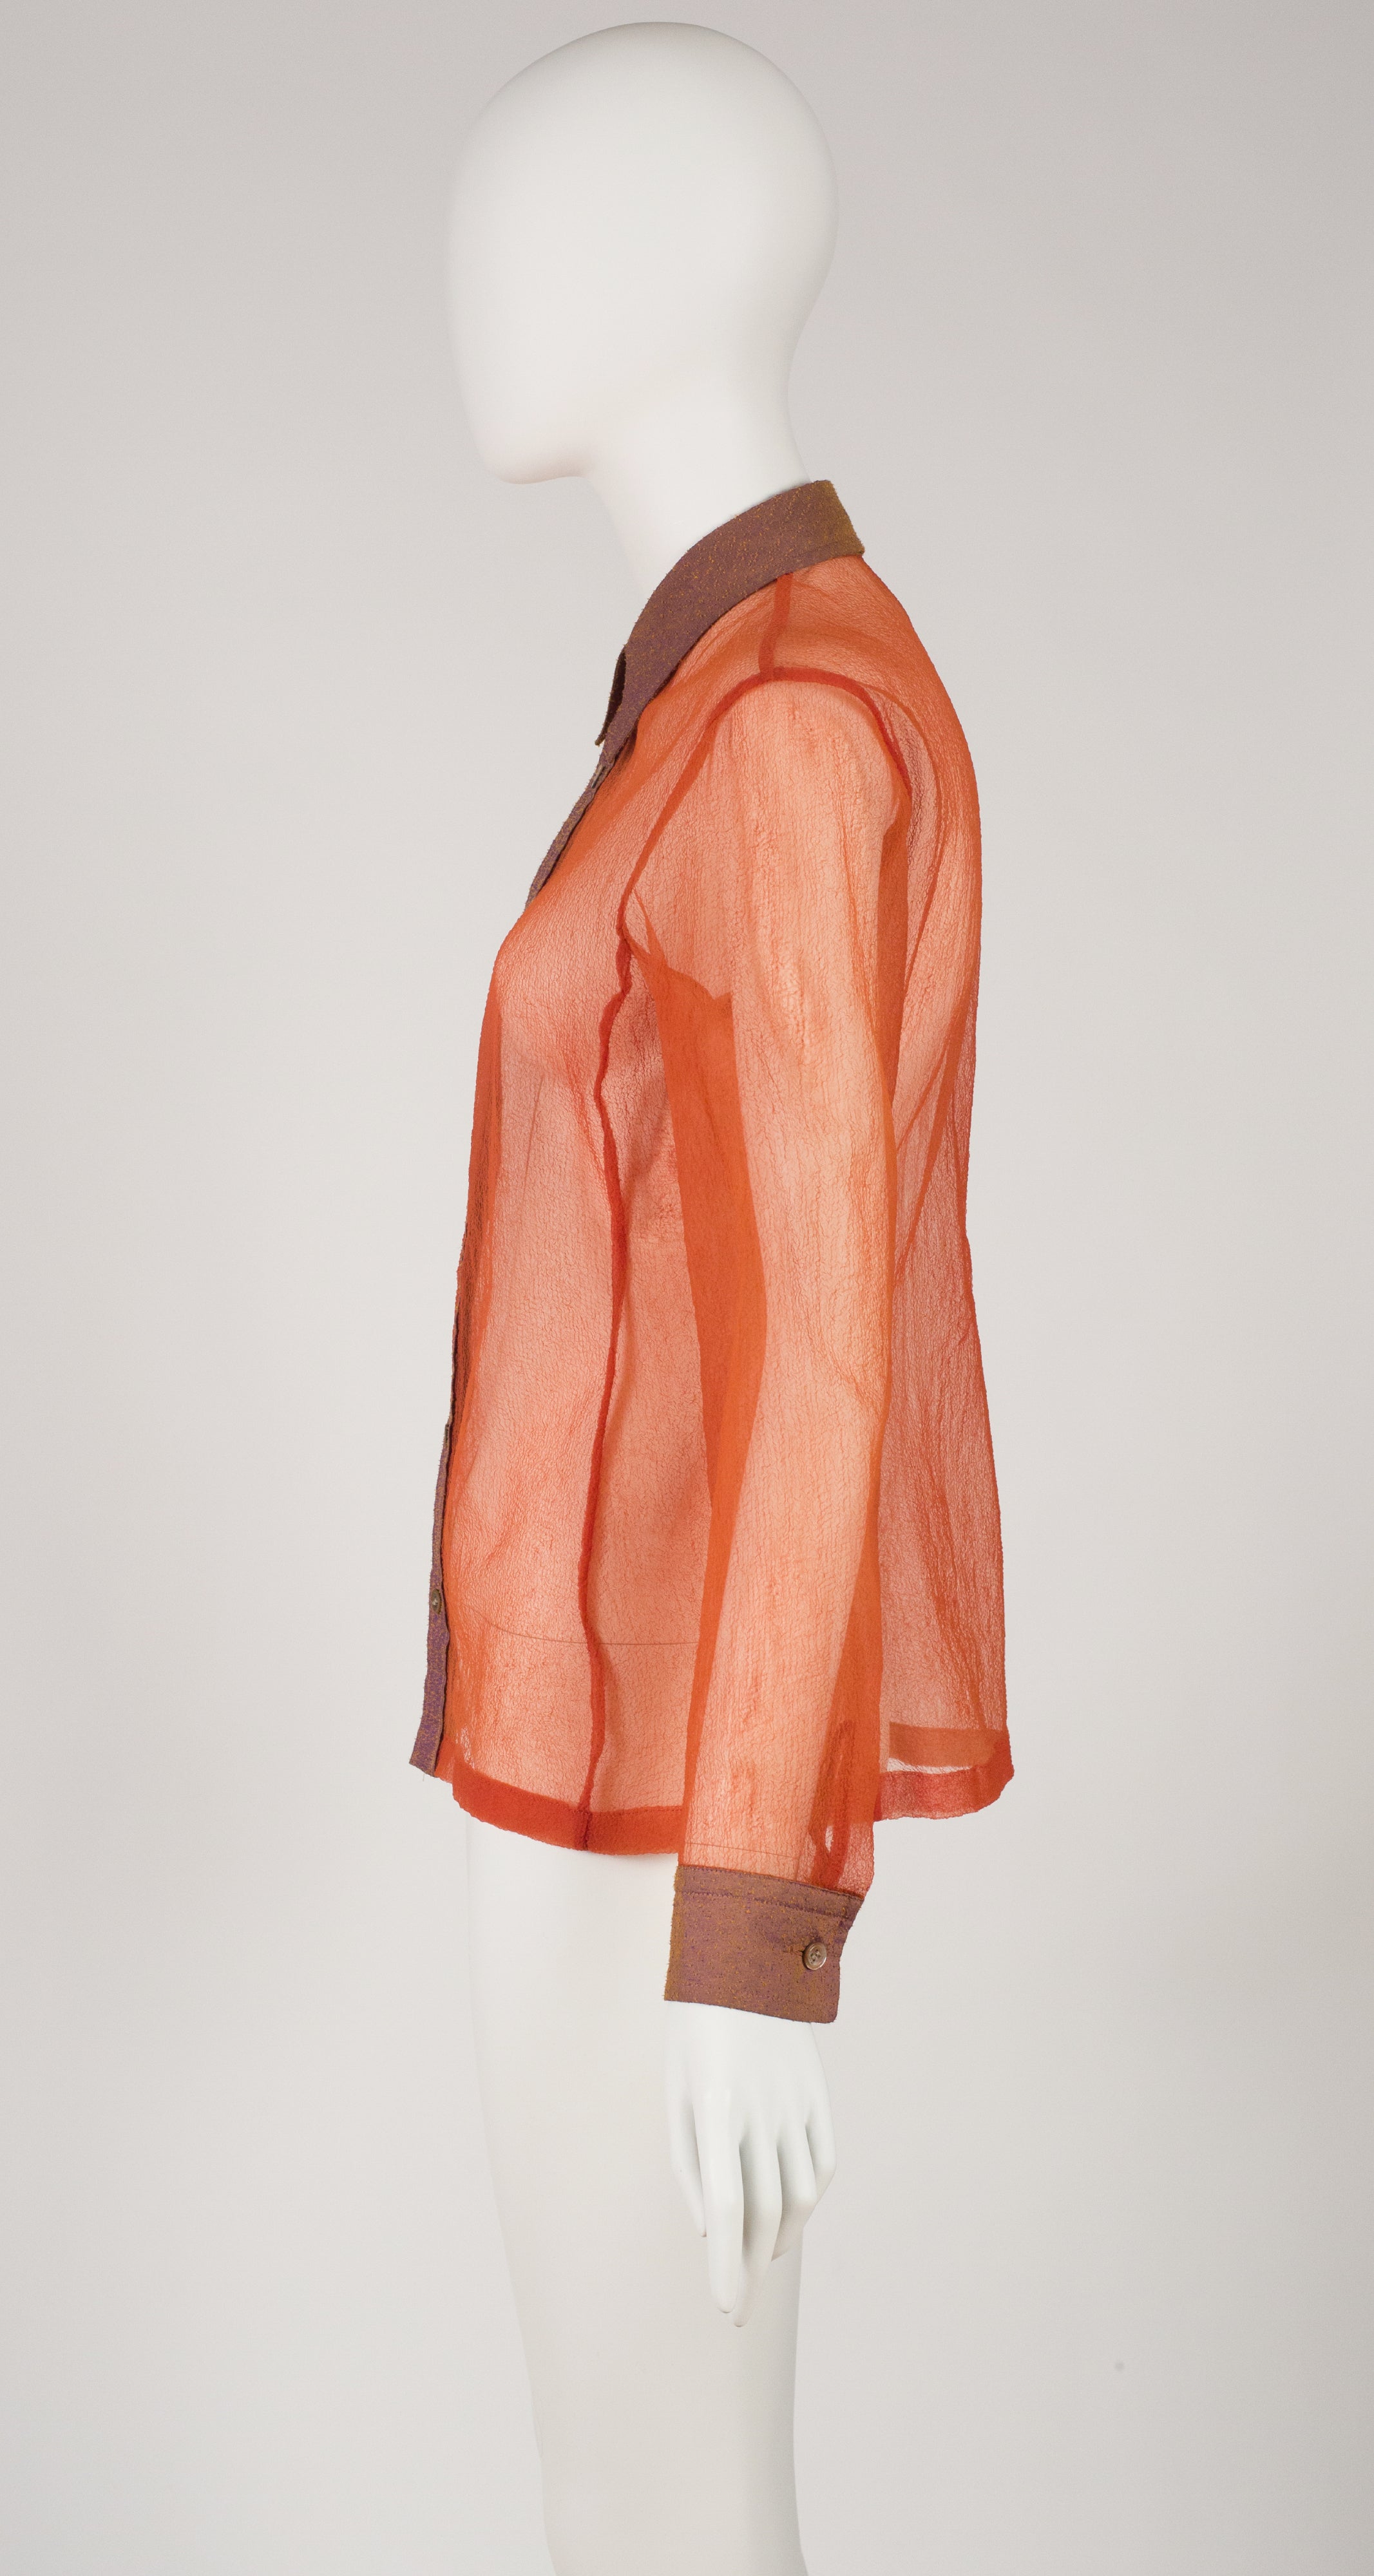 1990s Sheer Orange Collared Button-Up Blouse